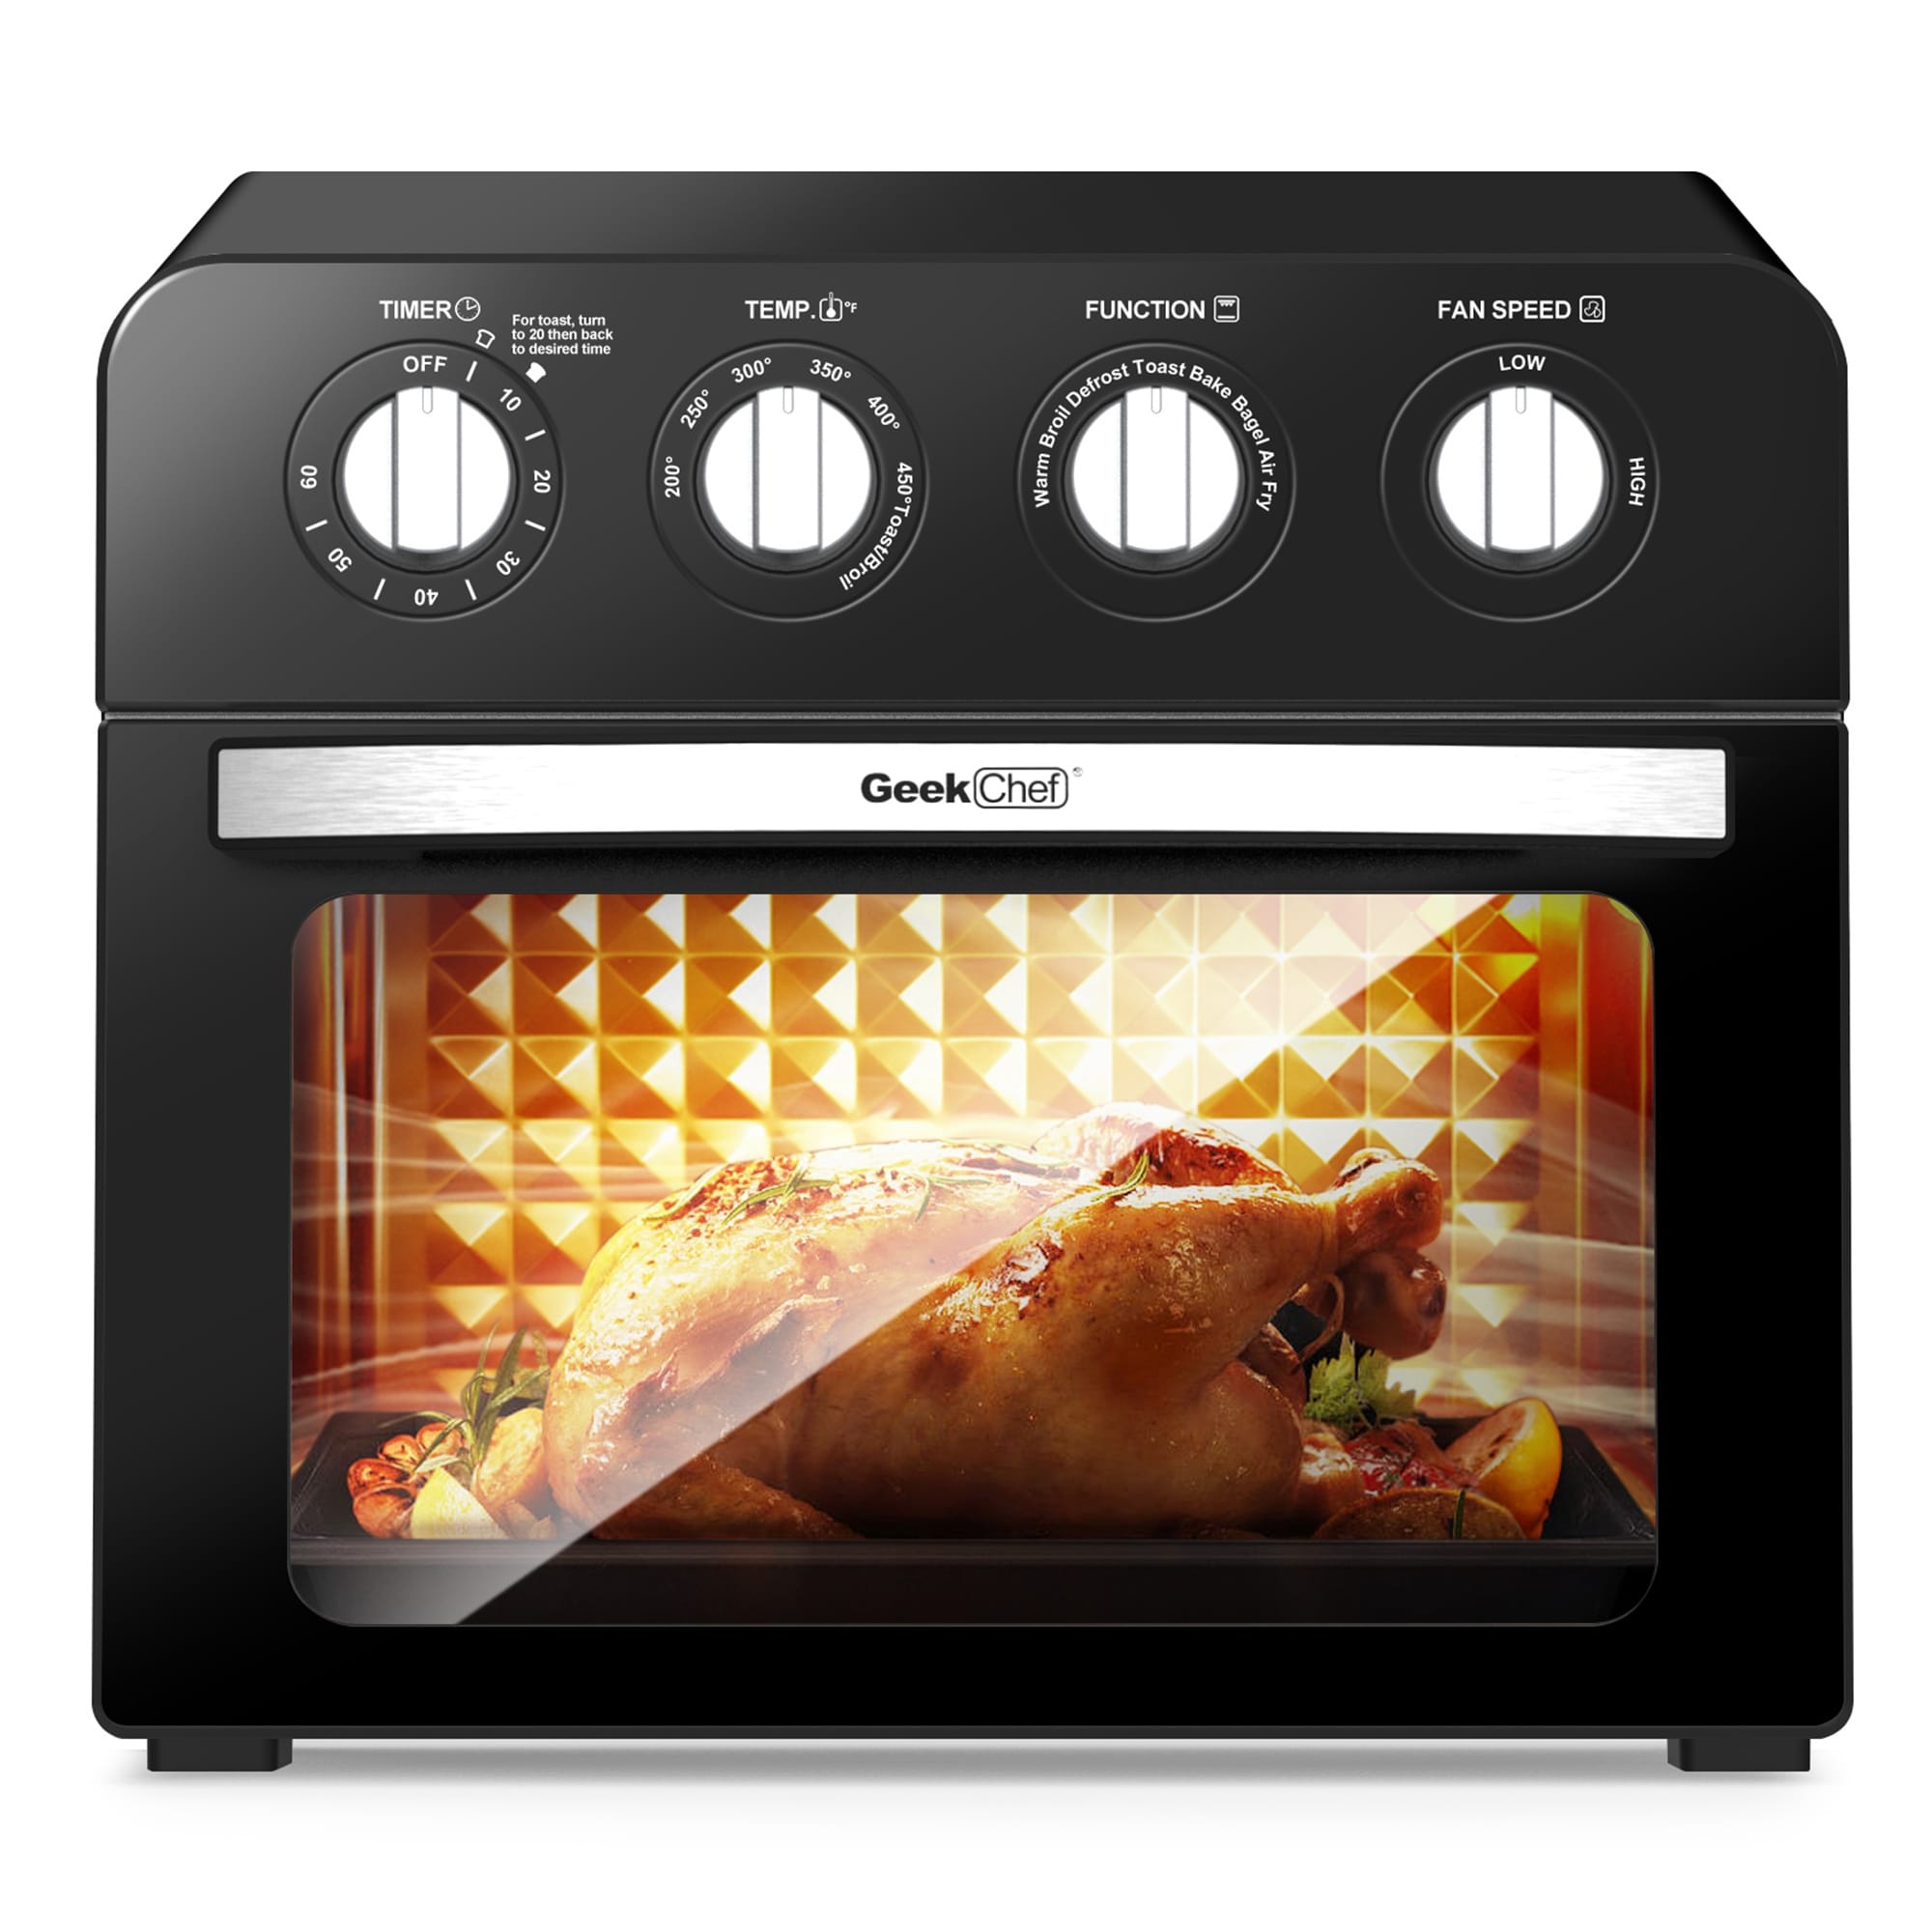 https://ak1.ostkcdn.com/images/products/is/images/direct/5dd27df321910ee85e7239cdcbc1ccfa04fd8a2d/Air-Fryer-Oven-%2C-Countertop-Toaster-Oven%2C-3-Rack-Levels%2C-4-mechinical-knobs%EF%BC%8CBlack-housing-with-single-glass-door%2824-QT-1700W%29.jpg